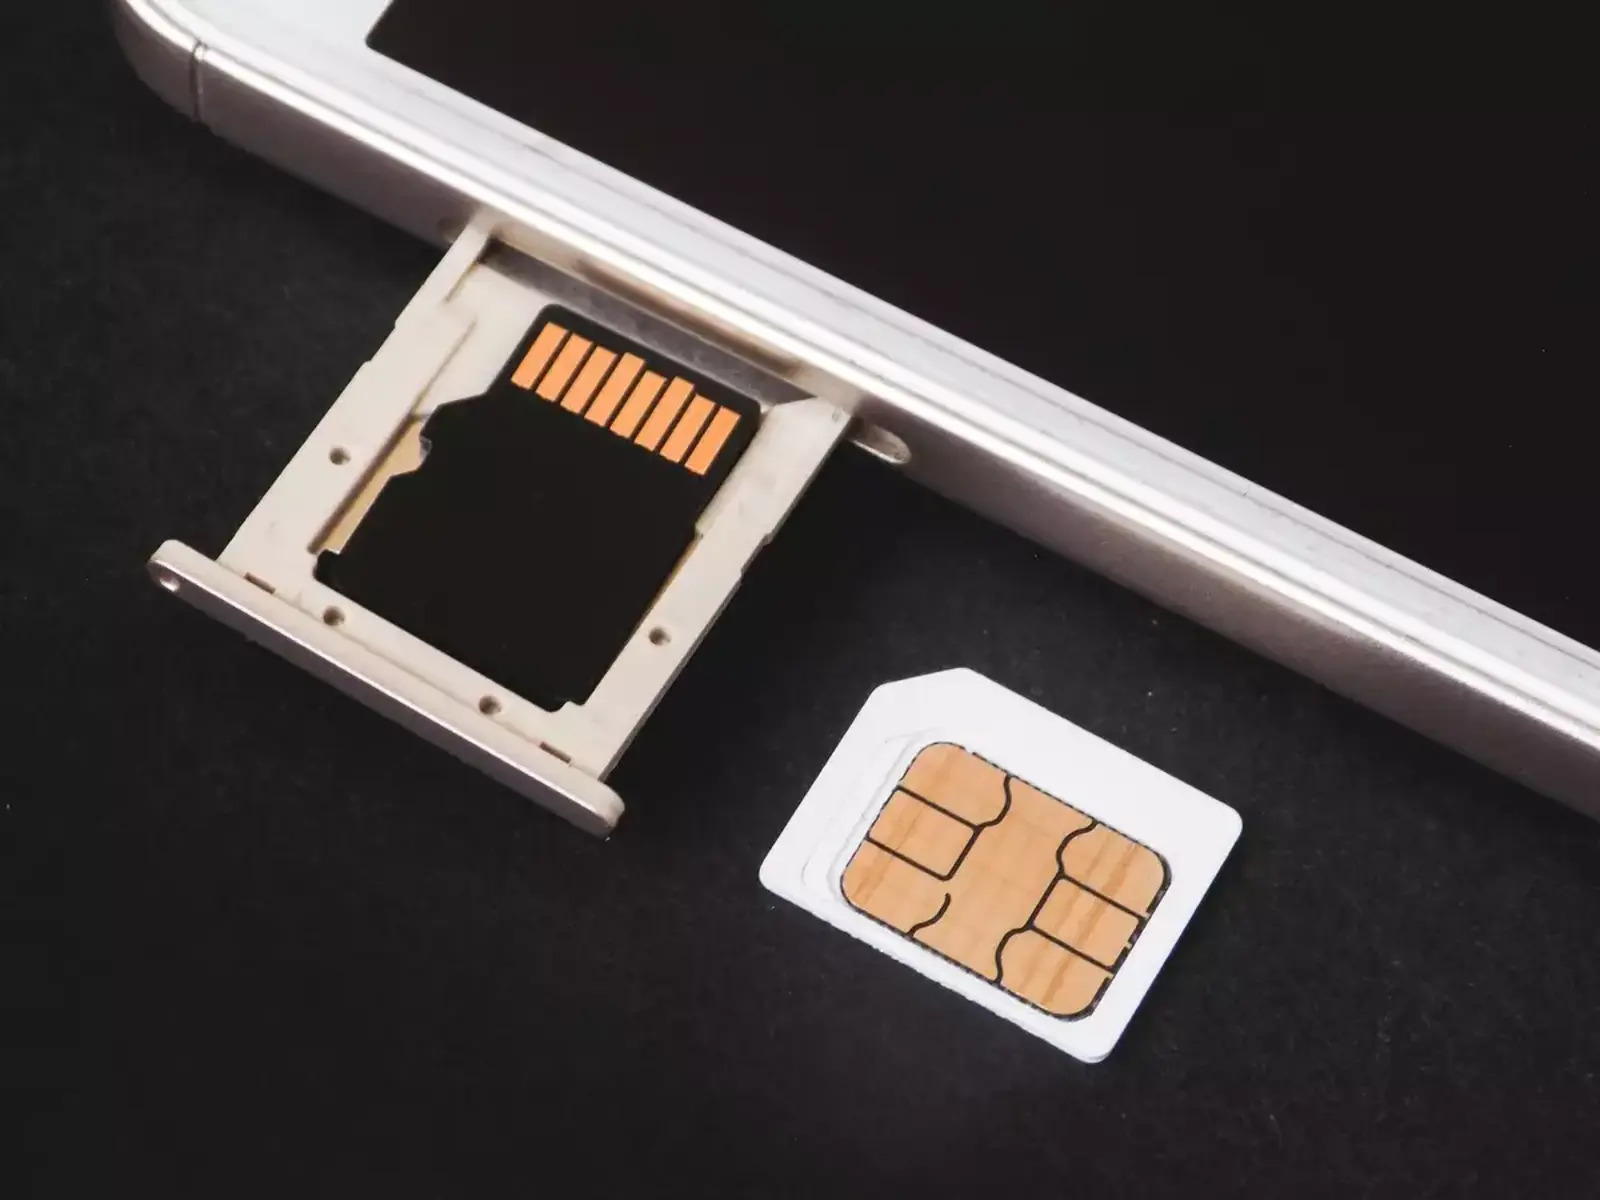 Transfer Data From SIM Card To Phone Memory: Step-by-Step Guide